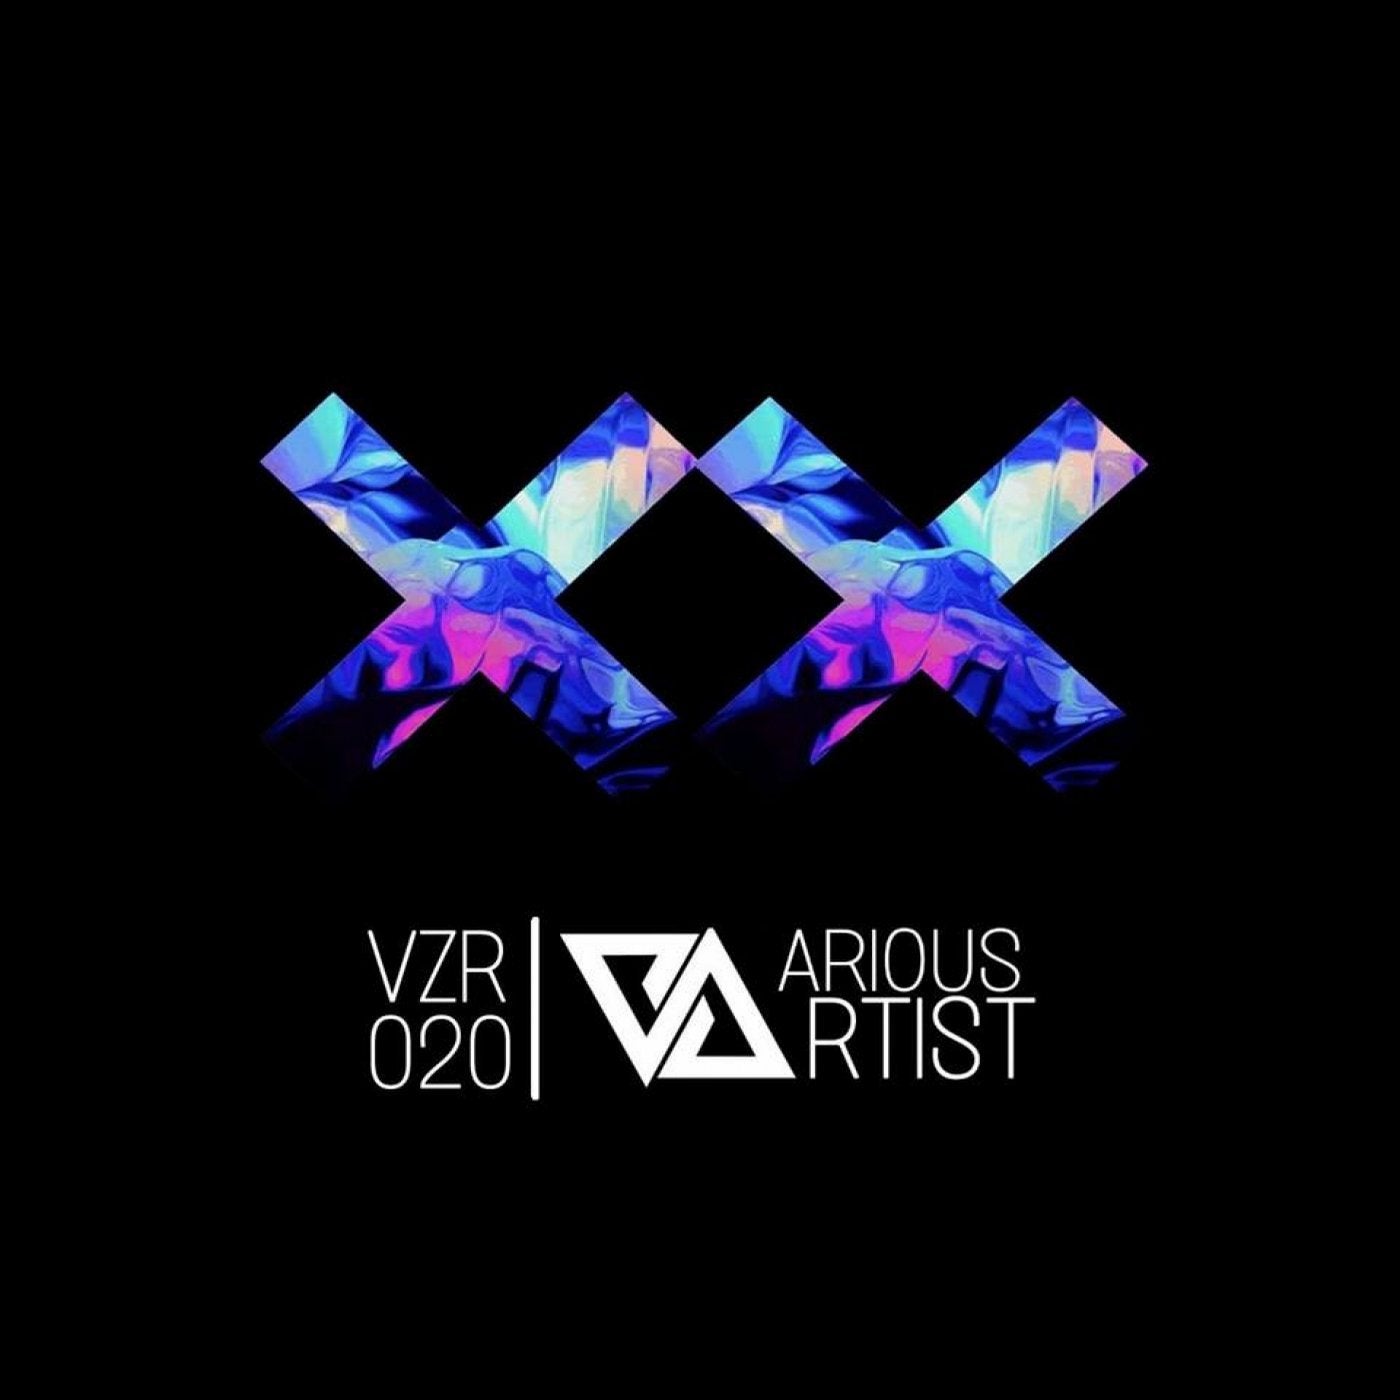 VZR Compilation of 2018